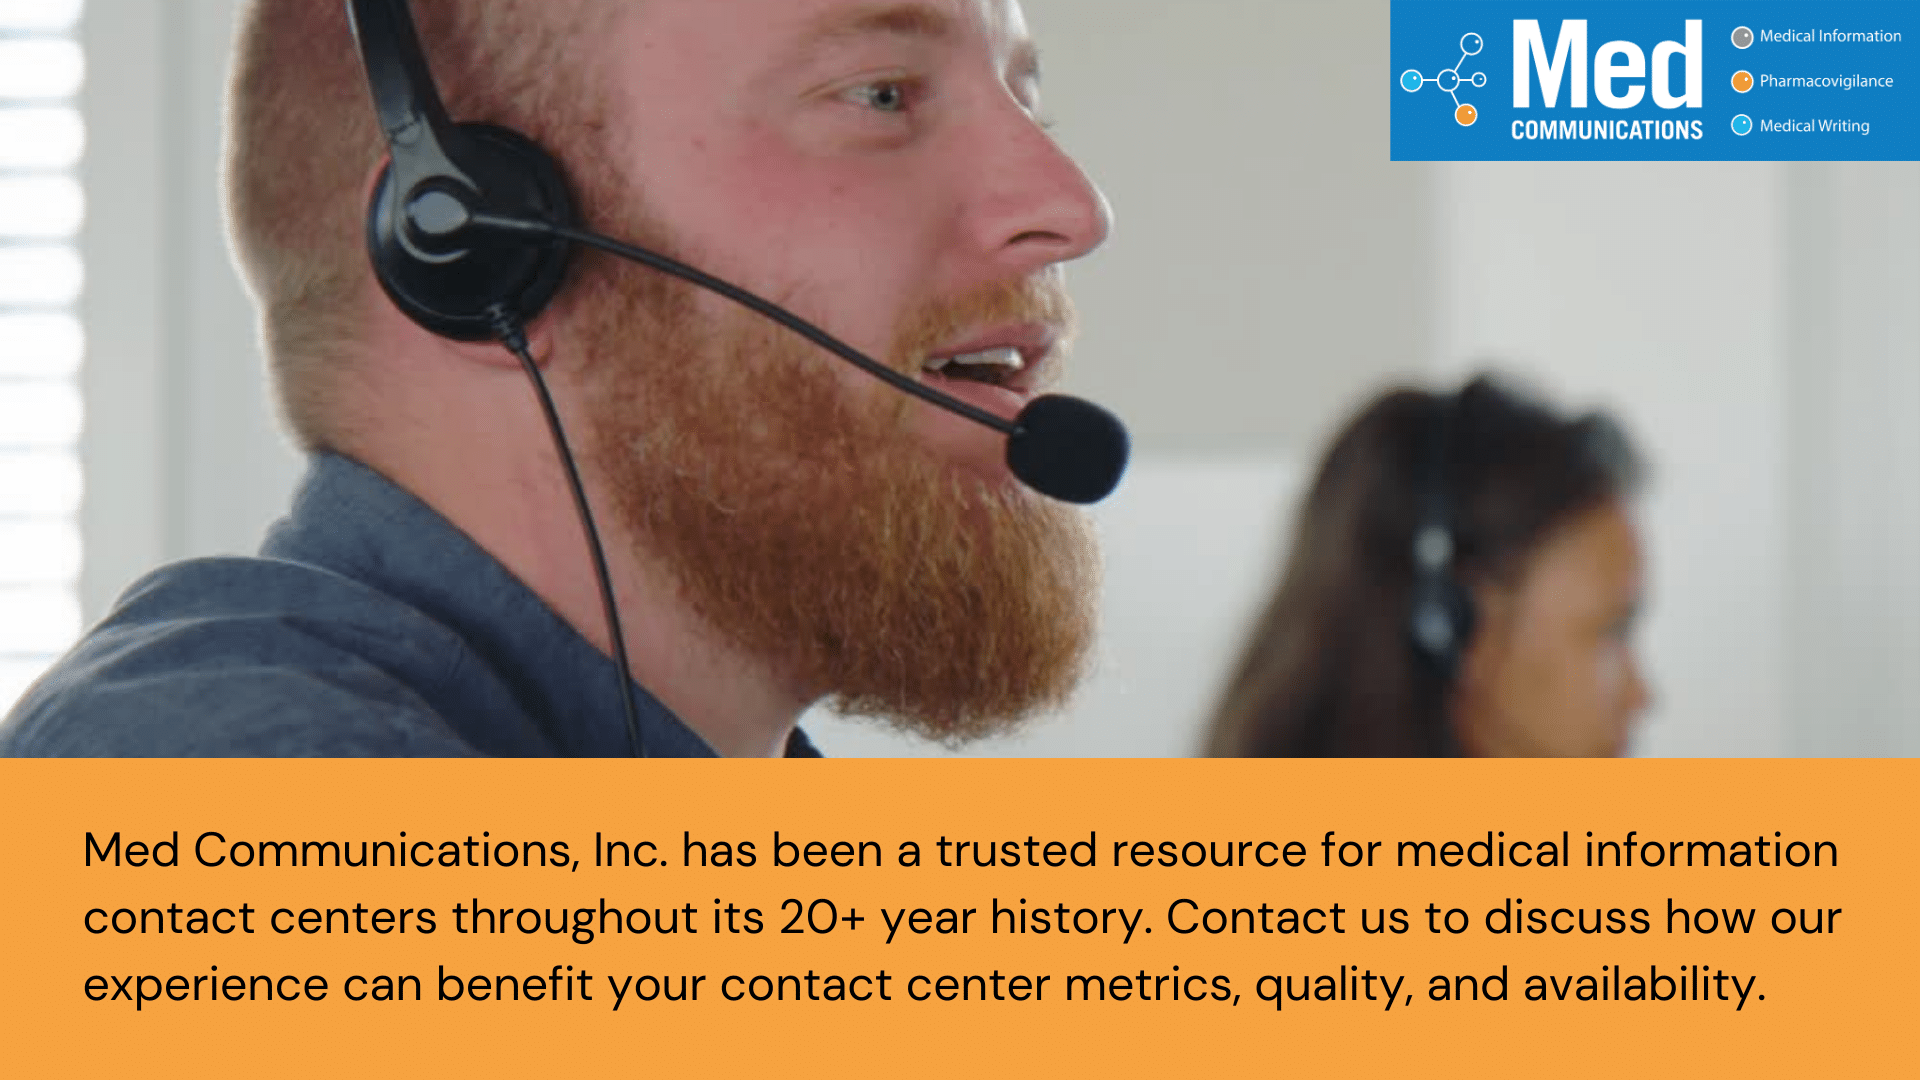 What Should you Evaluate in a Contact Center Vendor?